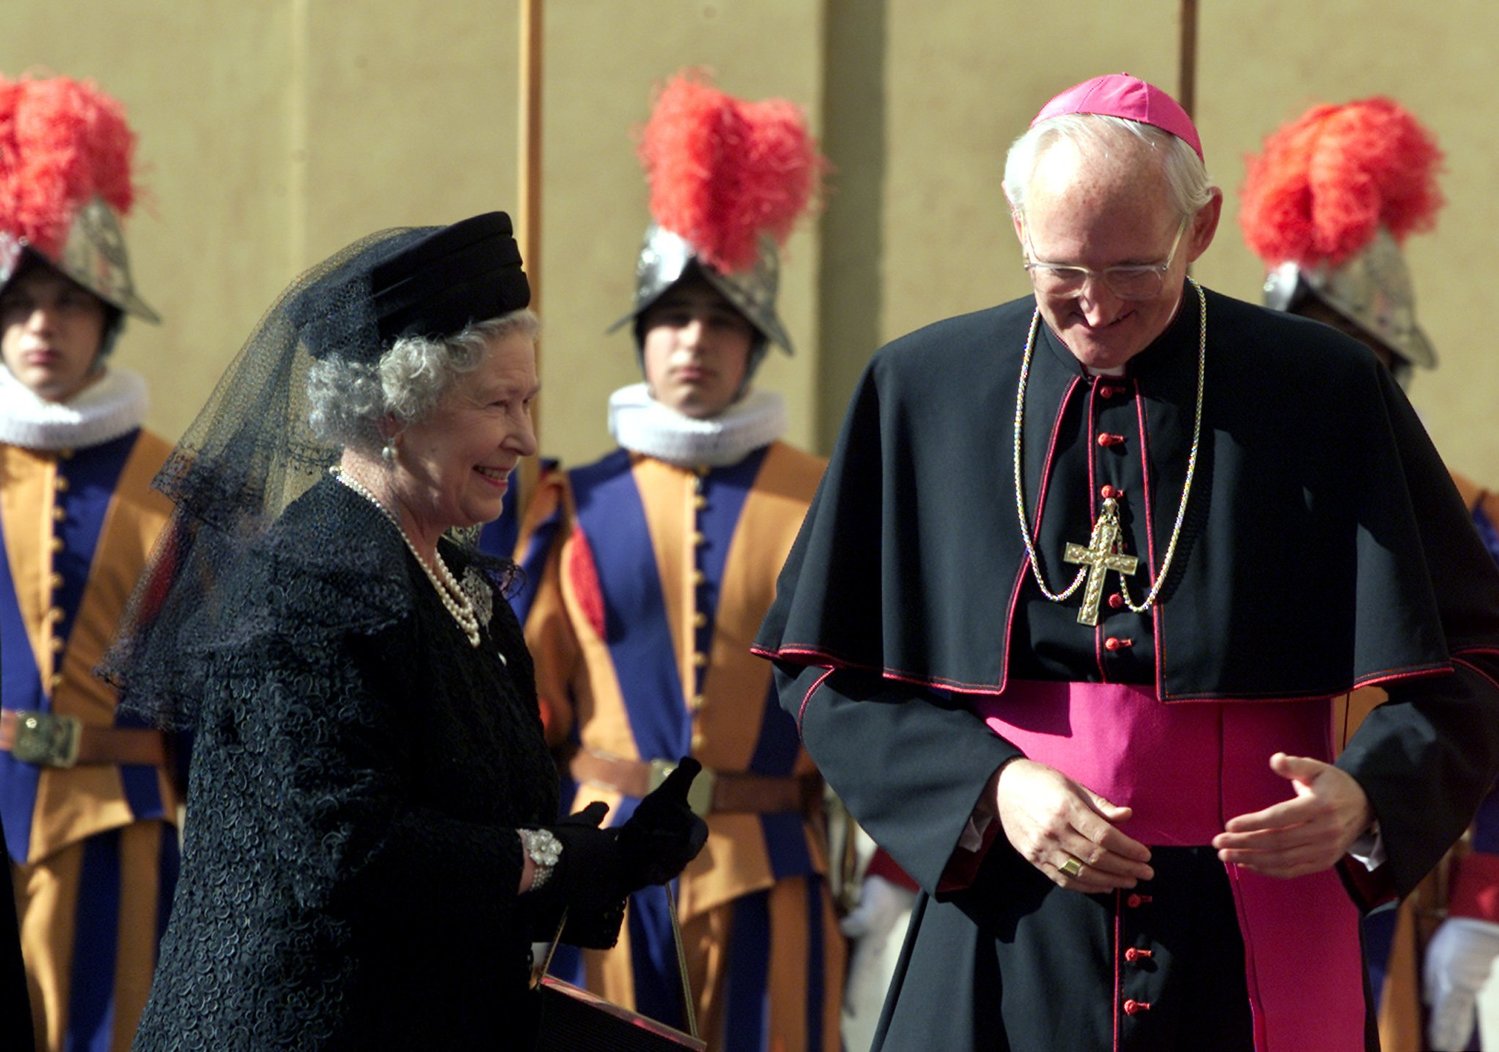 Britain’s Queen Elizabeth II is welcomed by U.S. Archbishop James Harvey, prefect of the papal household, as she arrives for her private audience with Pope John Paul II at the Vatican Oct. 17, 2000.